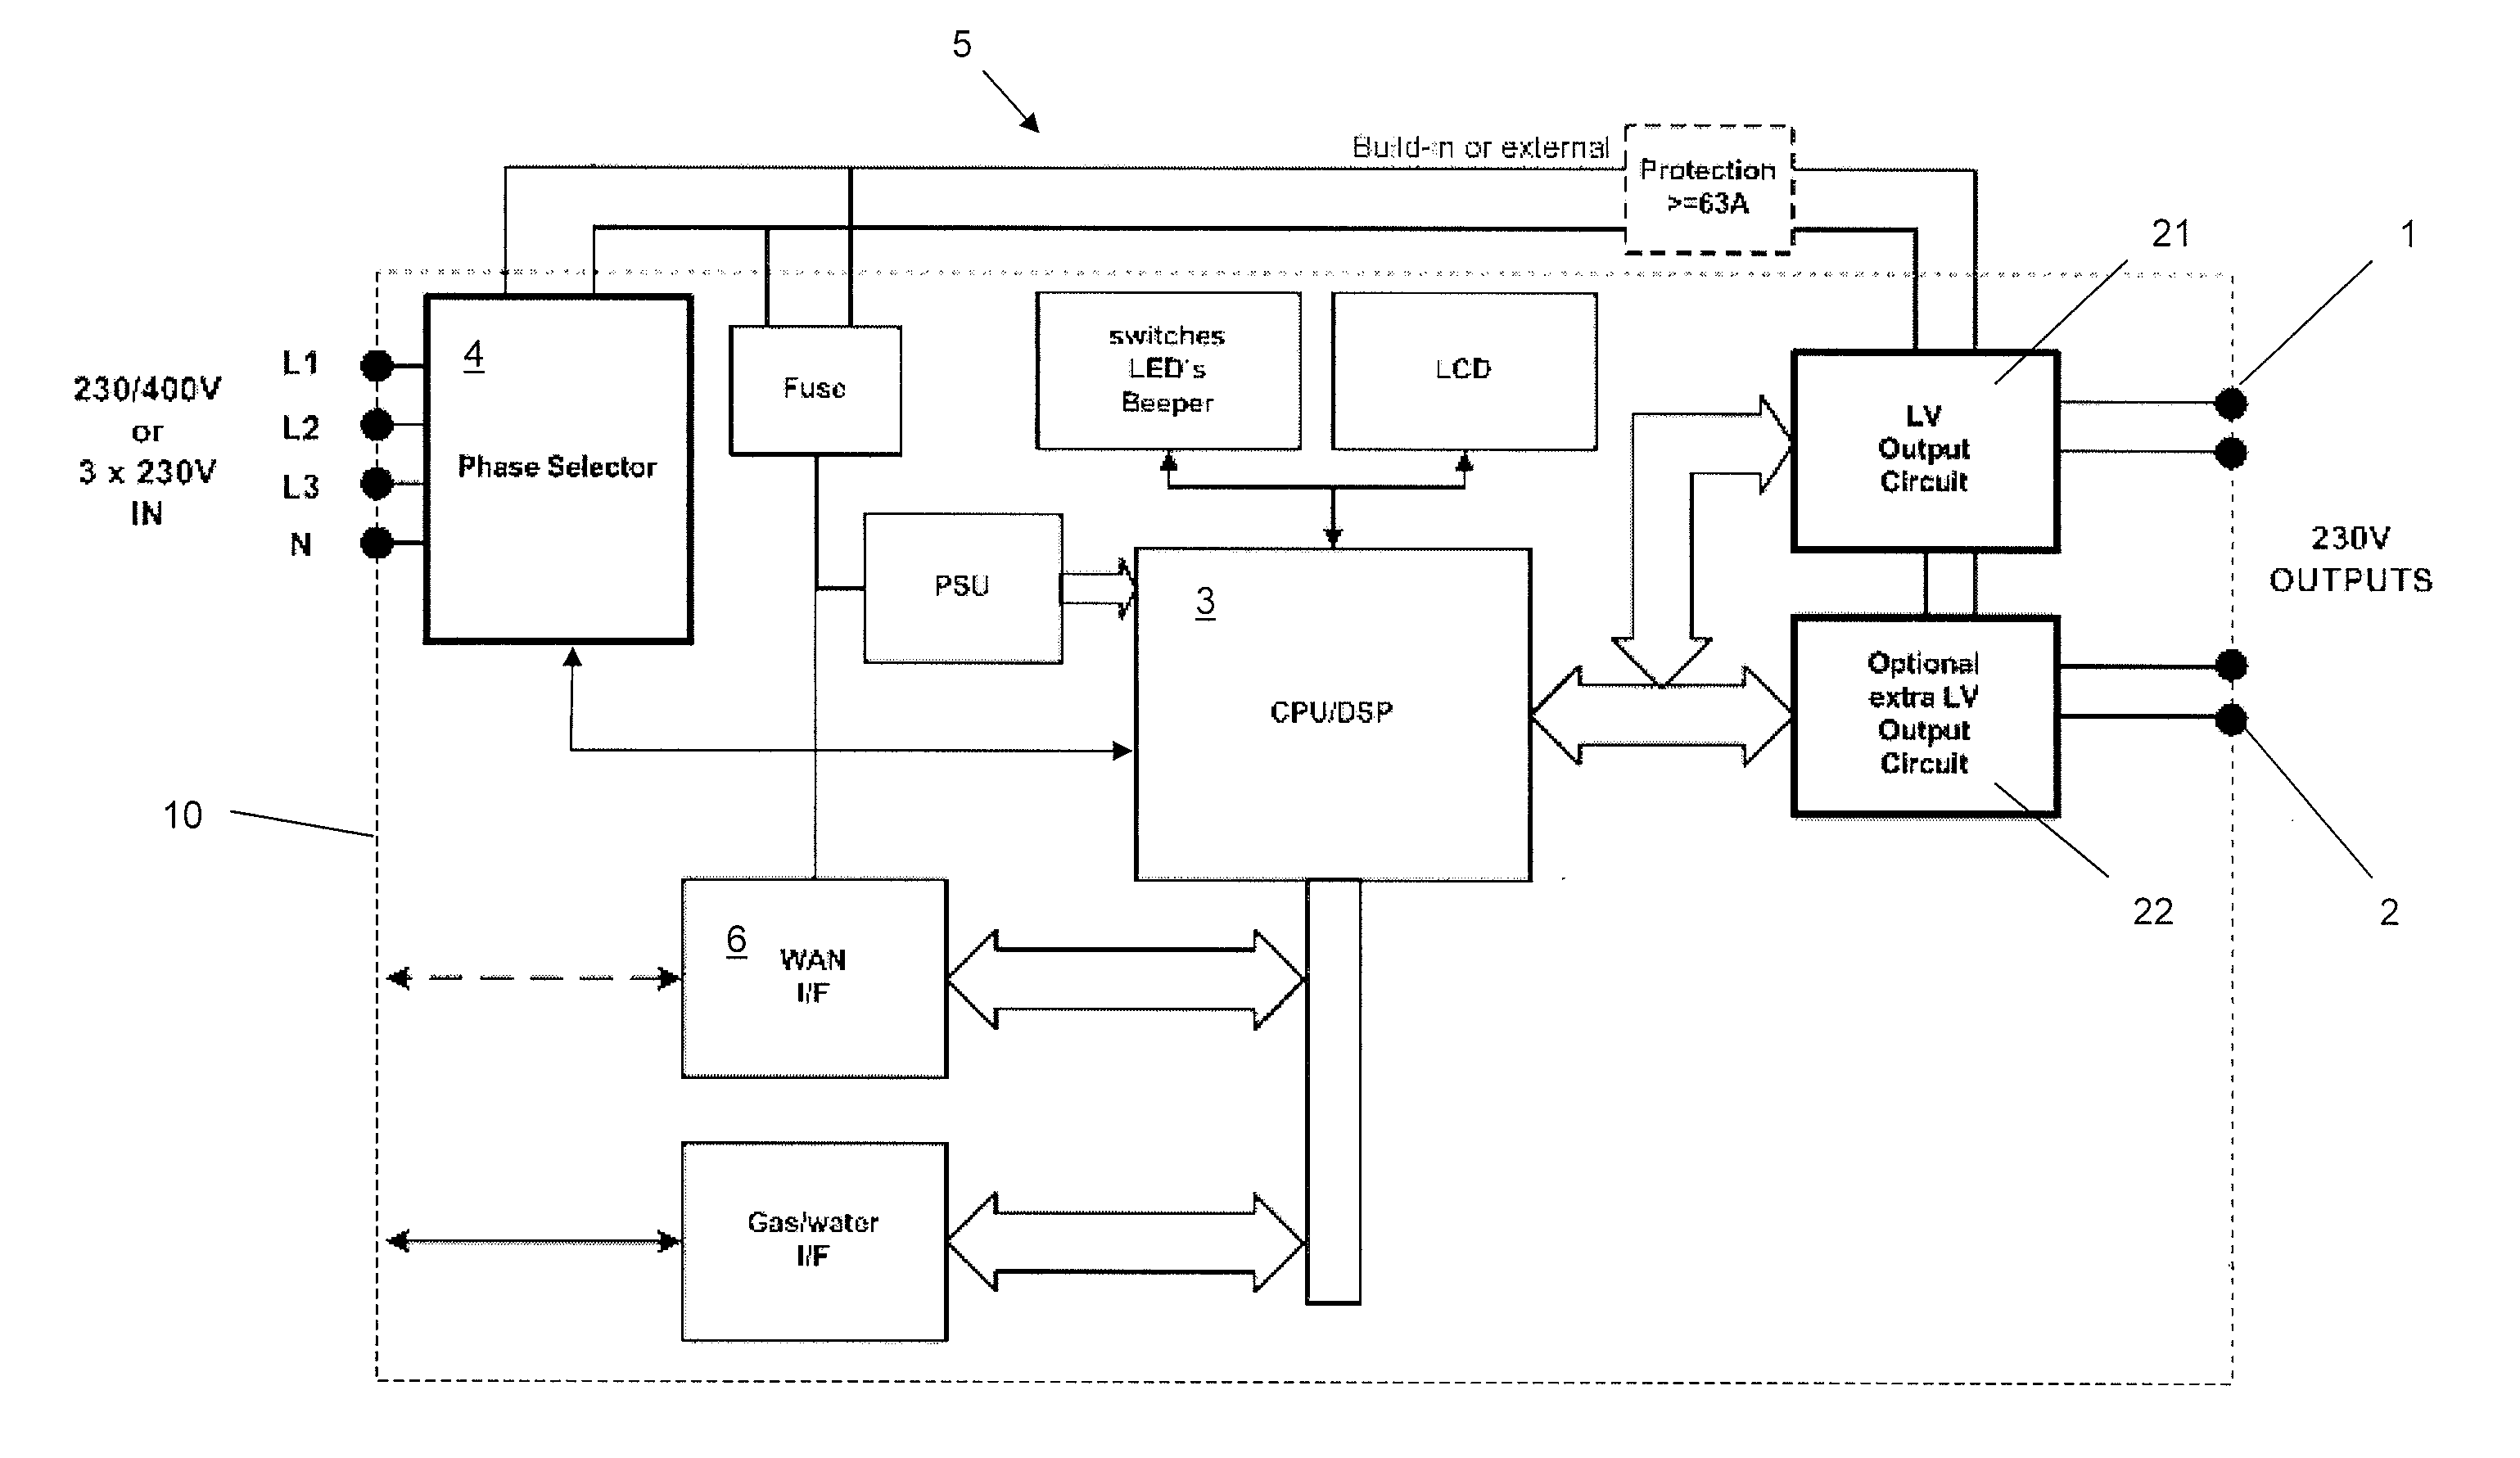 Smart metering device with phase selector